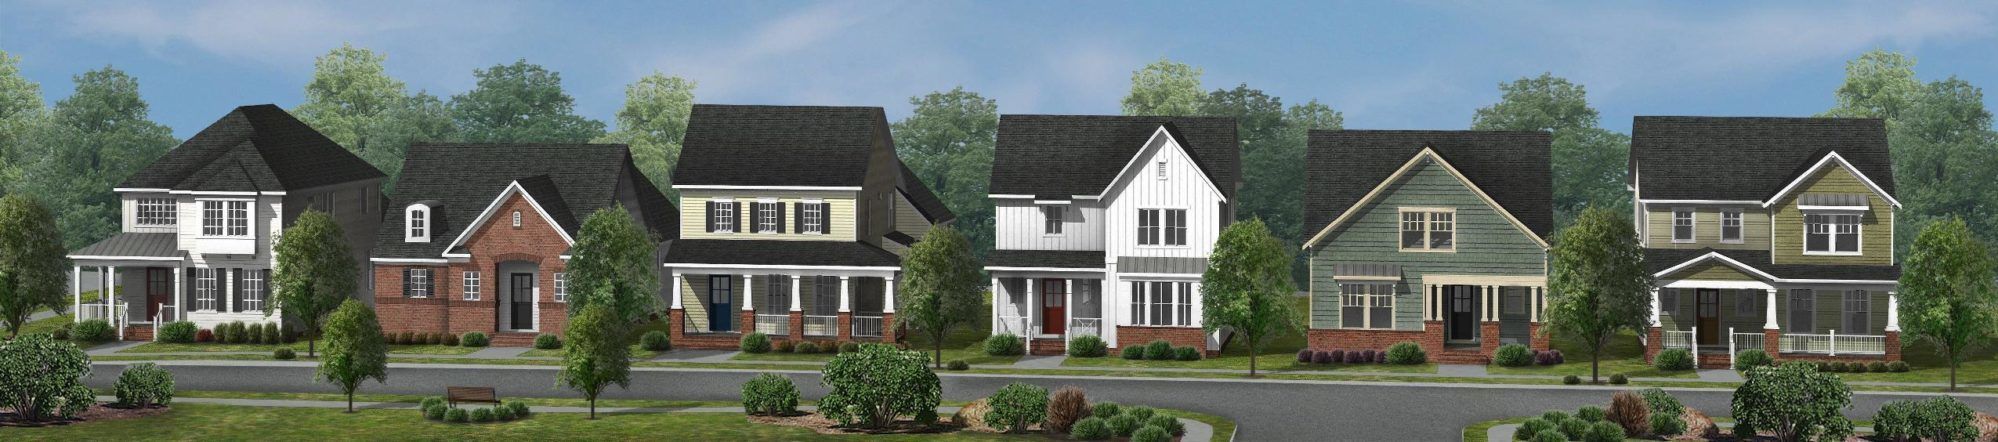 Rendering of rear load homes for WestBranch in Davidson